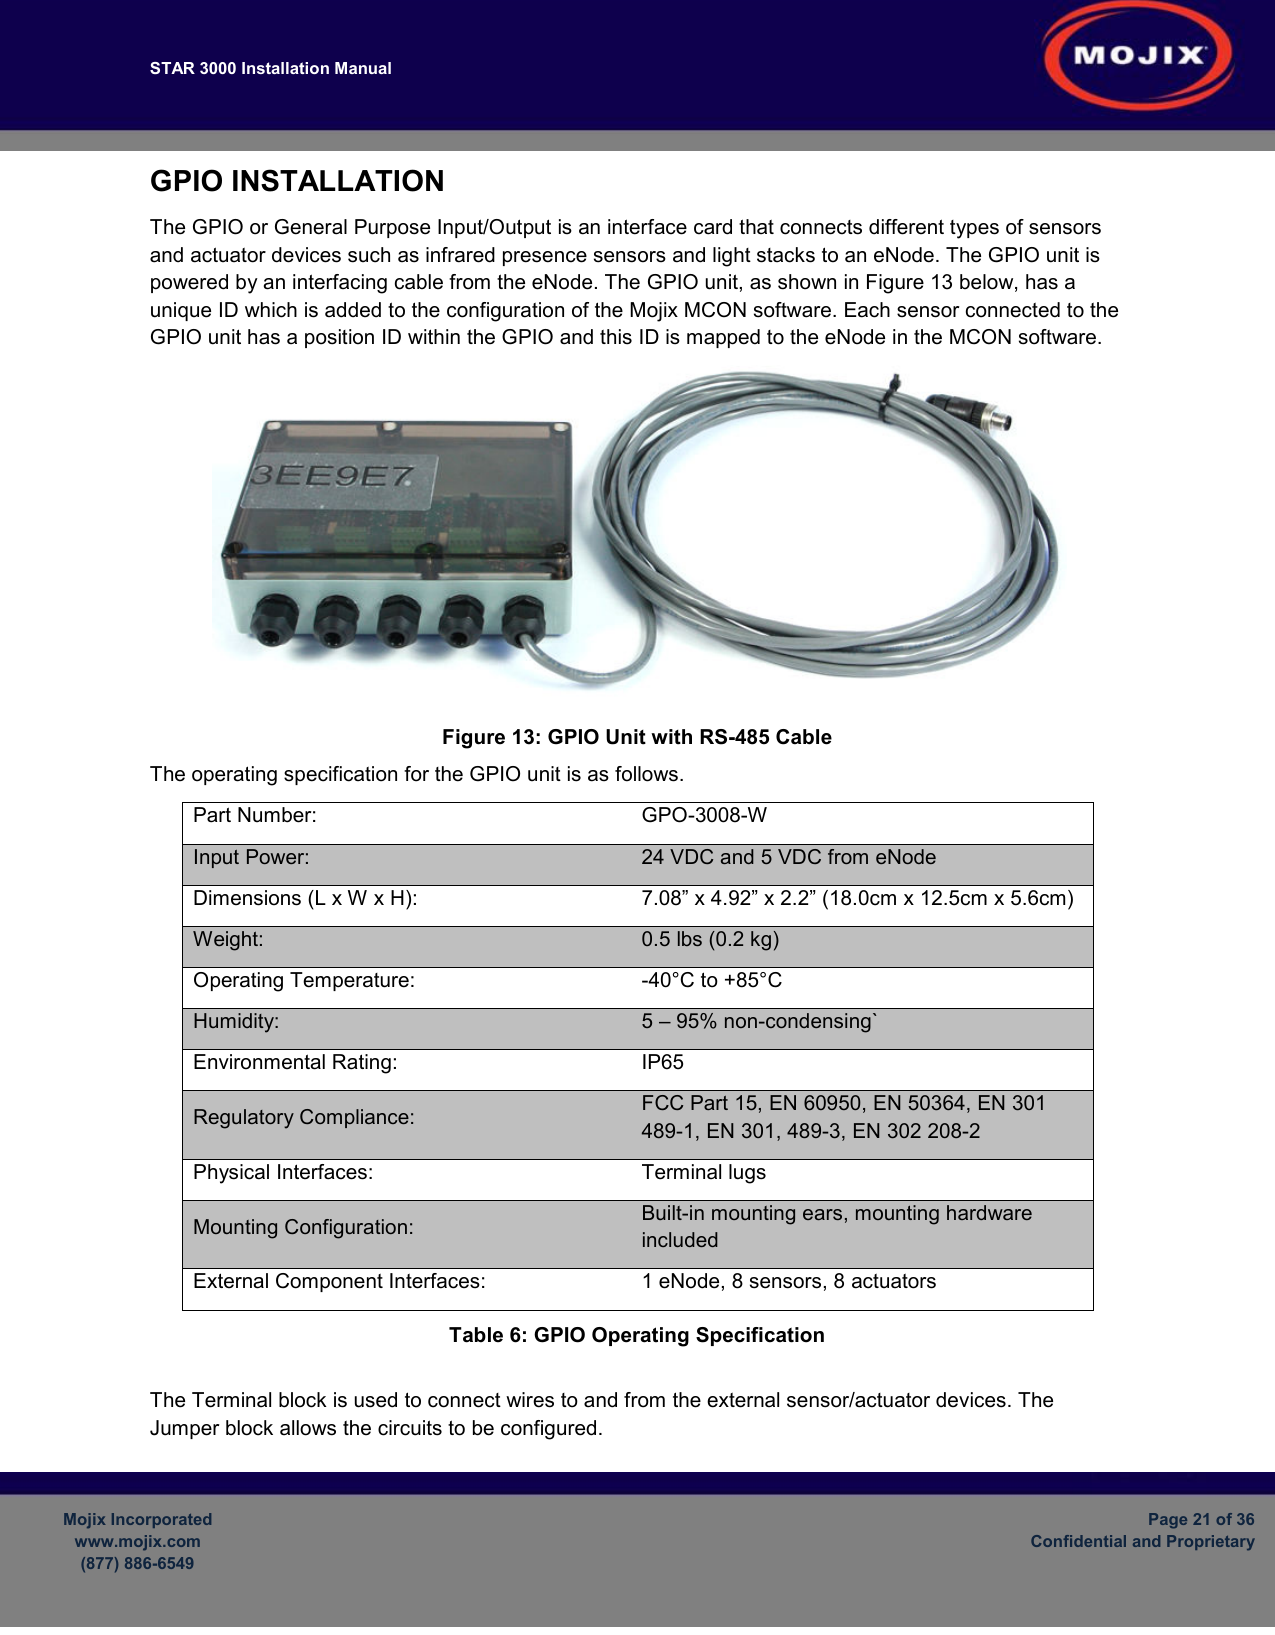 STAR 3000 Installation Manual         Mojix Incorporated www.mojix.com (877) 886-6549  Page 21 of 36 Confidential and Proprietary  GPIO INSTALLATION The GPIO or General Purpose Input/Output is an interface card that connects different types of sensors and actuator devices such as infrared presence sensors and light stacks to an eNode. The GPIO unit is powered by an interfacing cable from the eNode. The GPIO unit, as shown in Figure 13 below, has a unique ID which is added to the configuration of the Mojix MCON software. Each sensor connected to the GPIO unit has a position ID within the GPIO and this ID is mapped to the eNode in the MCON software.   Figure 13: GPIO Unit with RS-485 Cable The operating specification for the GPIO unit is as follows. Part Number:  GPO-3008-W Input Power:  24 VDC and 5 VDC from eNode Dimensions (L x W x H):  7.08” x 4.92” x 2.2” (18.0cm x 12.5cm x 5.6cm) Weight:   0.5 lbs (0.2 kg) Operating Temperature:  -40°C to +85°C Humidity:  5 – 95% non-condensing` Environmental Rating:  IP65 Regulatory Compliance:  FCC Part 15, EN 60950, EN 50364, EN 301 489-1, EN 301, 489-3, EN 302 208-2 Physical Interfaces:  Terminal lugs Mounting Configuration:  Built-in mounting ears, mounting hardware included External Component Interfaces:  1 eNode, 8 sensors, 8 actuators Table 6: GPIO Operating Specification Product Overview The Terminal block is used to connect wires to and from the external sensor/actuator devices. The Jumper block allows the circuits to be configured.  